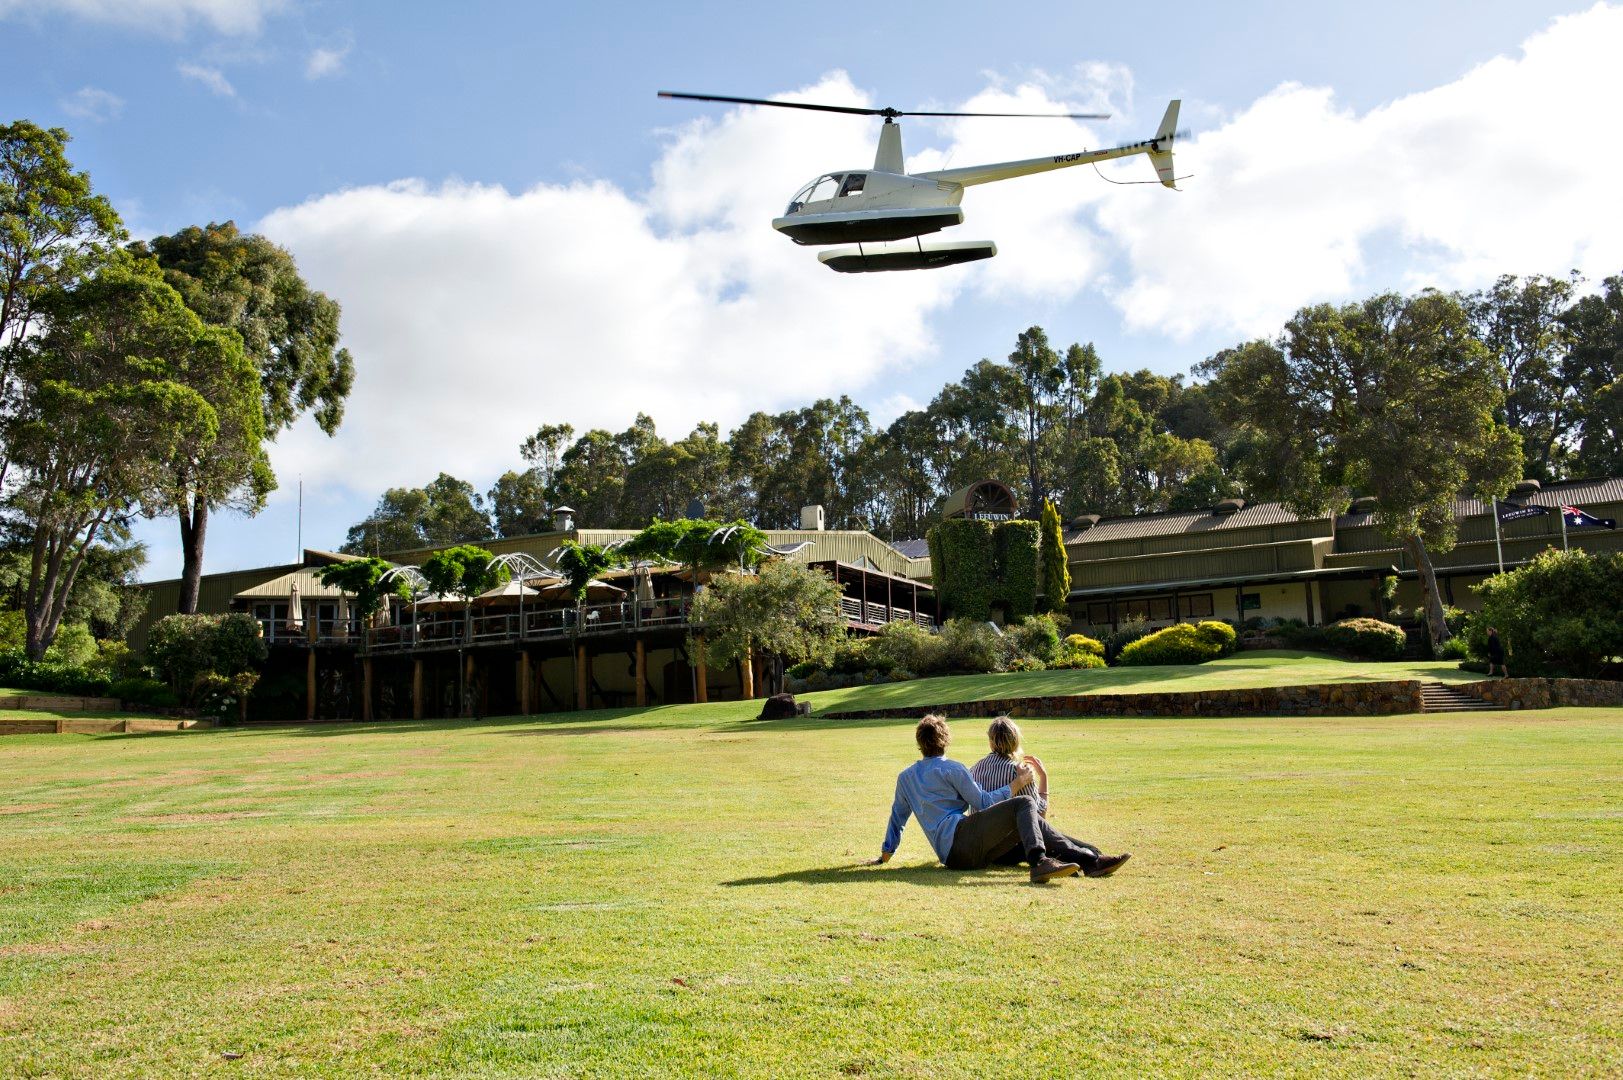 Couple sitting on the lawn at Leeuwin Estate while a helicopter flies overhead. Credit Scenic Helicopters.